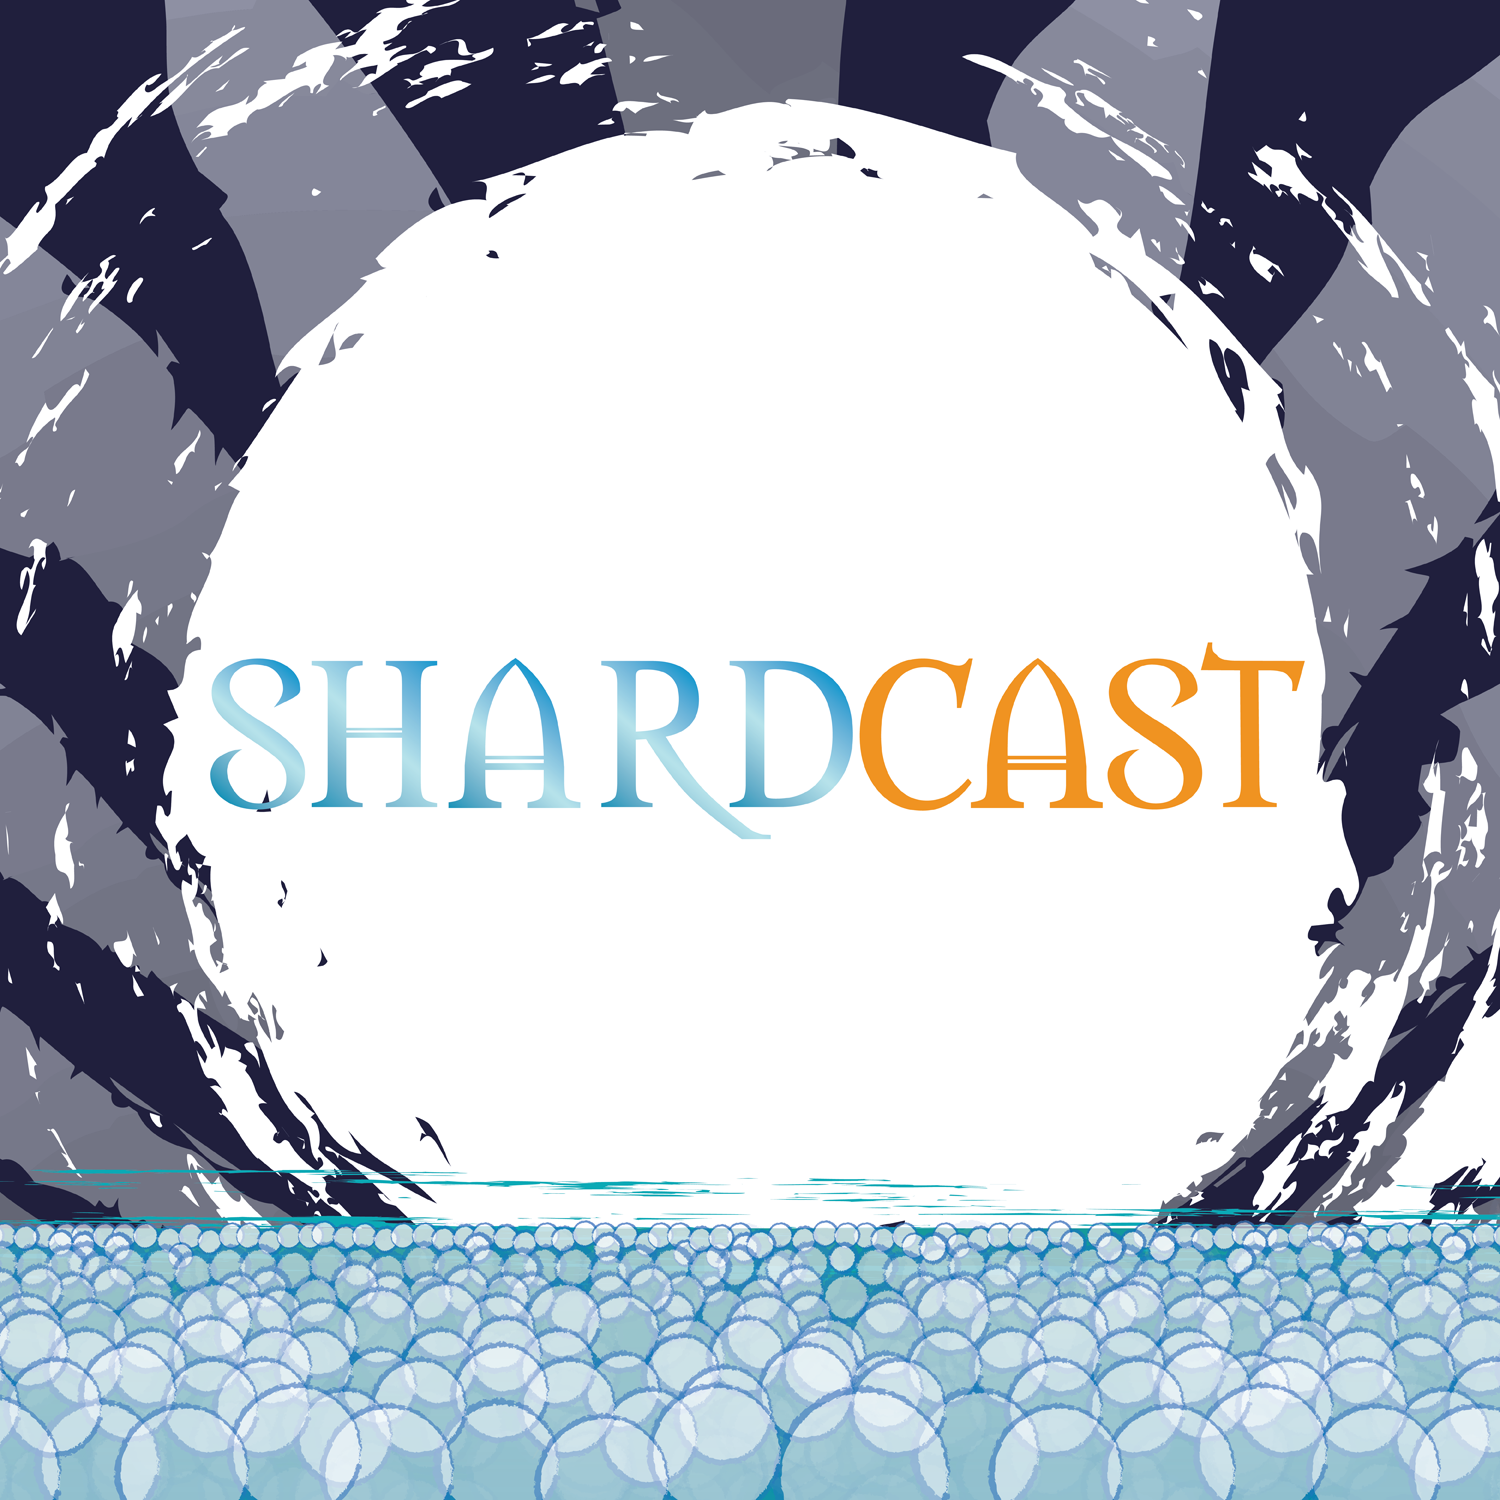 More information about "Shardcast: The Set, Trell, and Paalm"